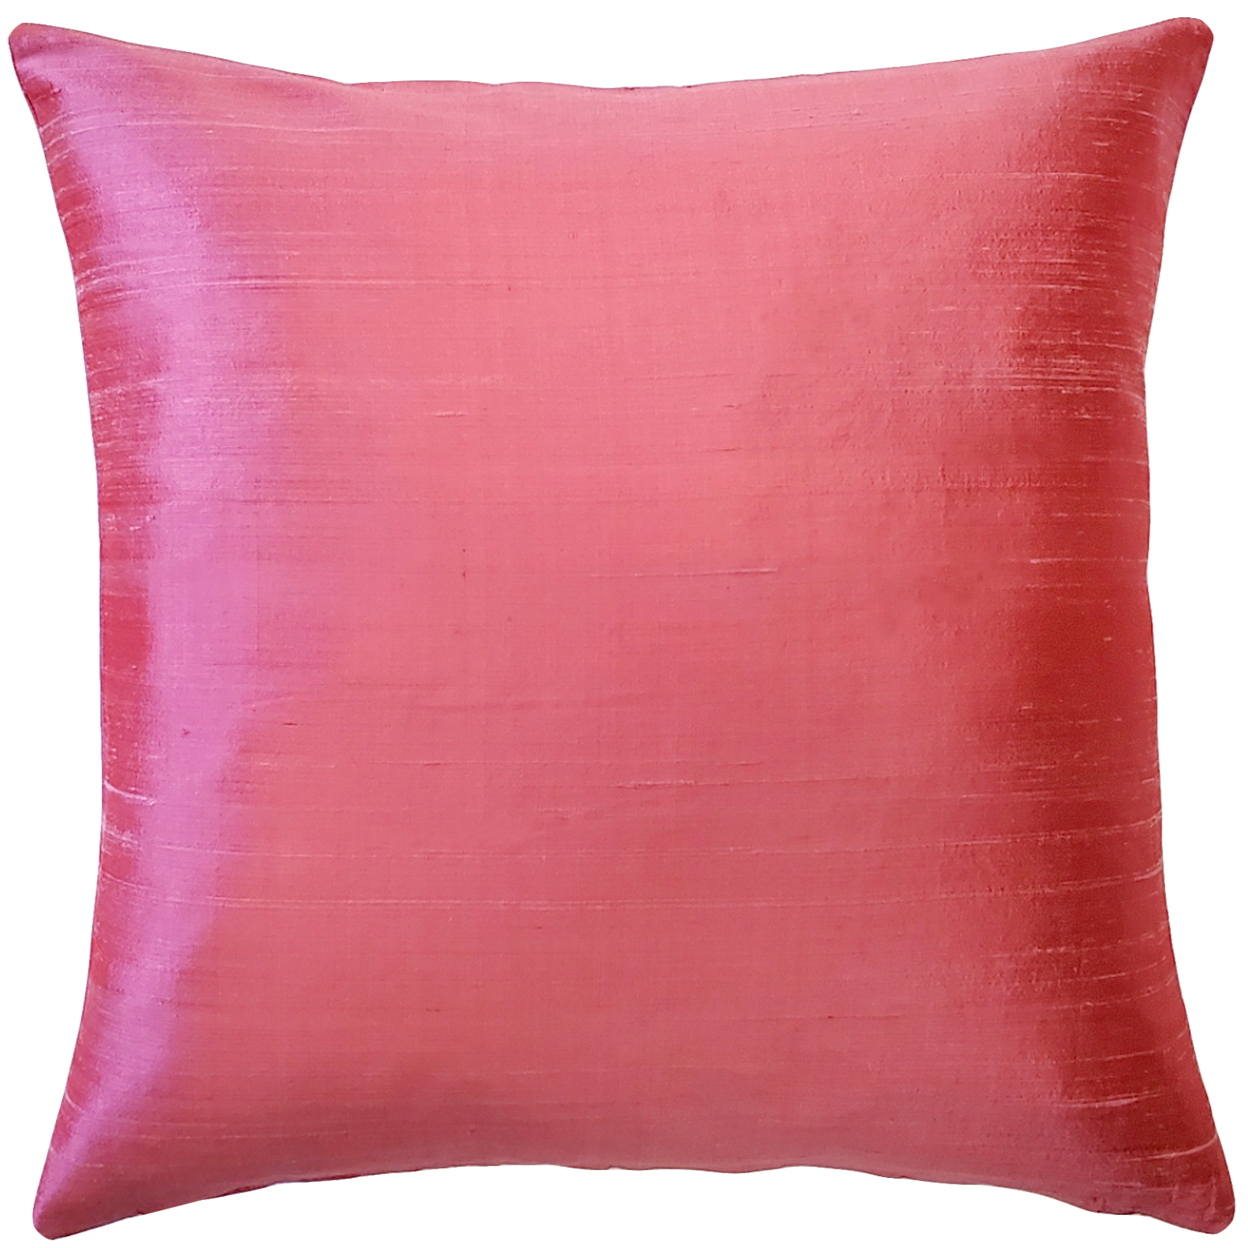 Sankara Rose Blush Silk Throw Pillow 16x16 Inches Square, Complete Pillow With Polyfill Pillow Insert